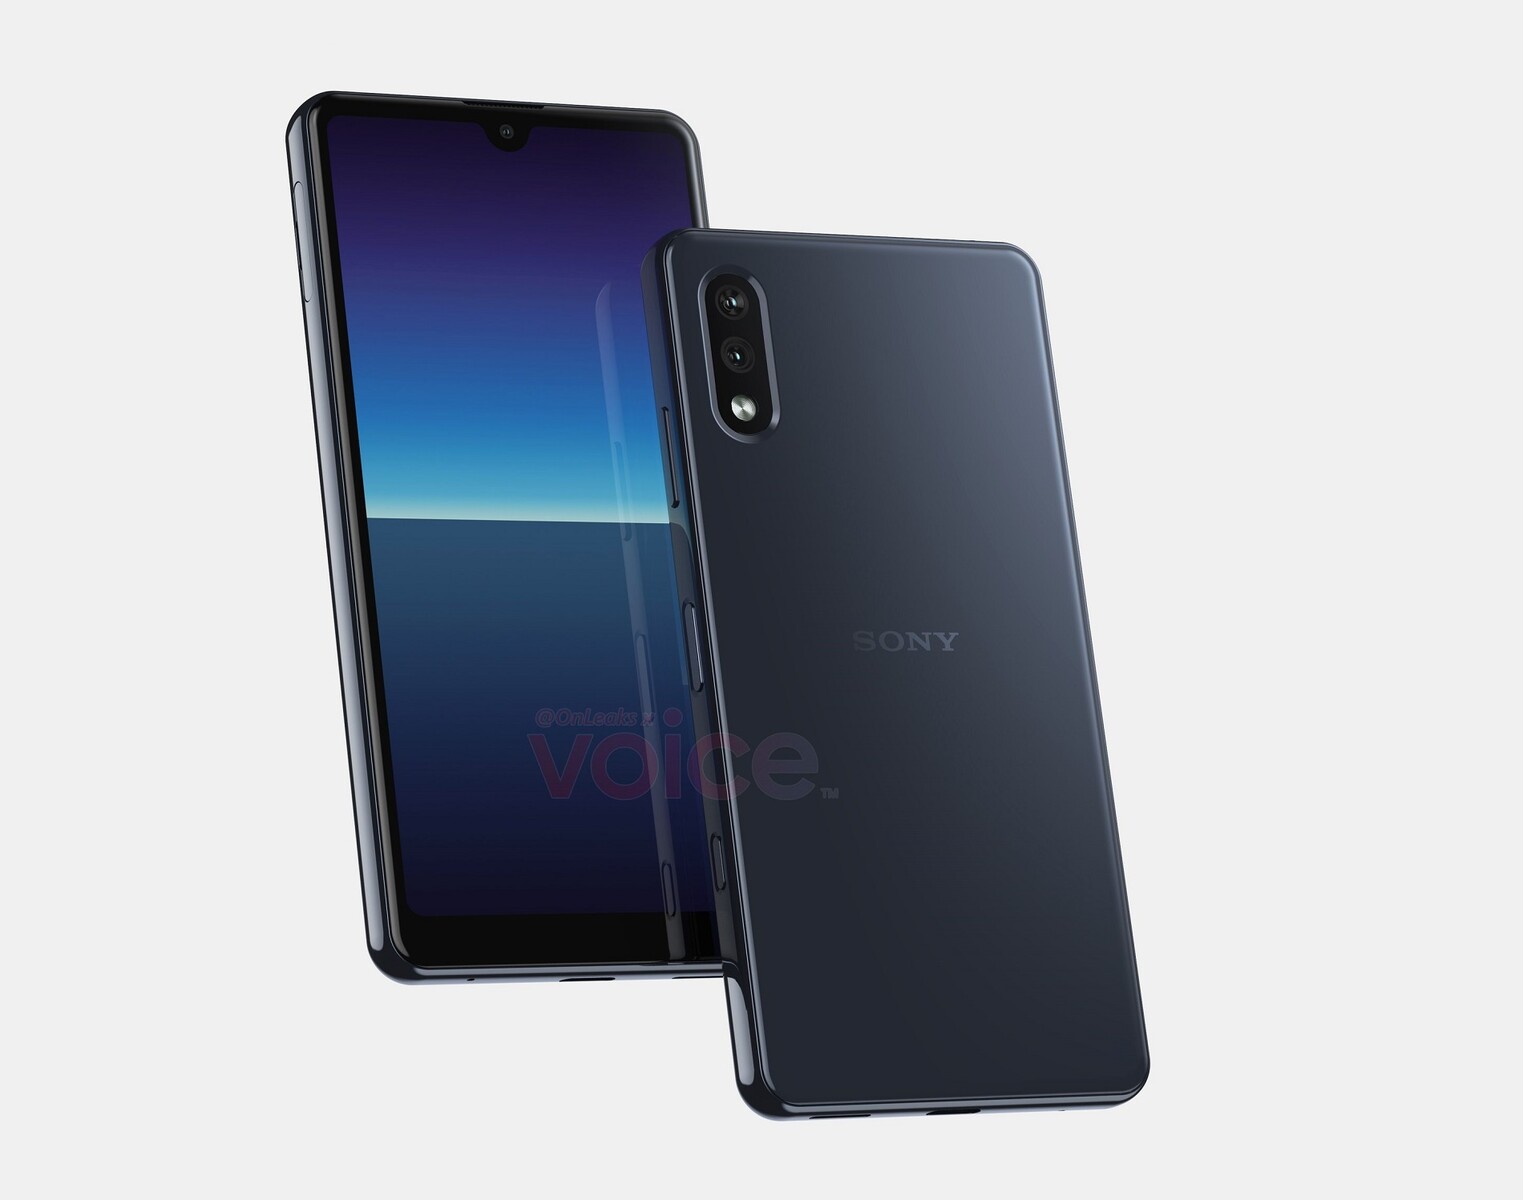 The next compact Xperia smartphone from Sony is unveiled with a 140 mm height and a 5.5-inch screen